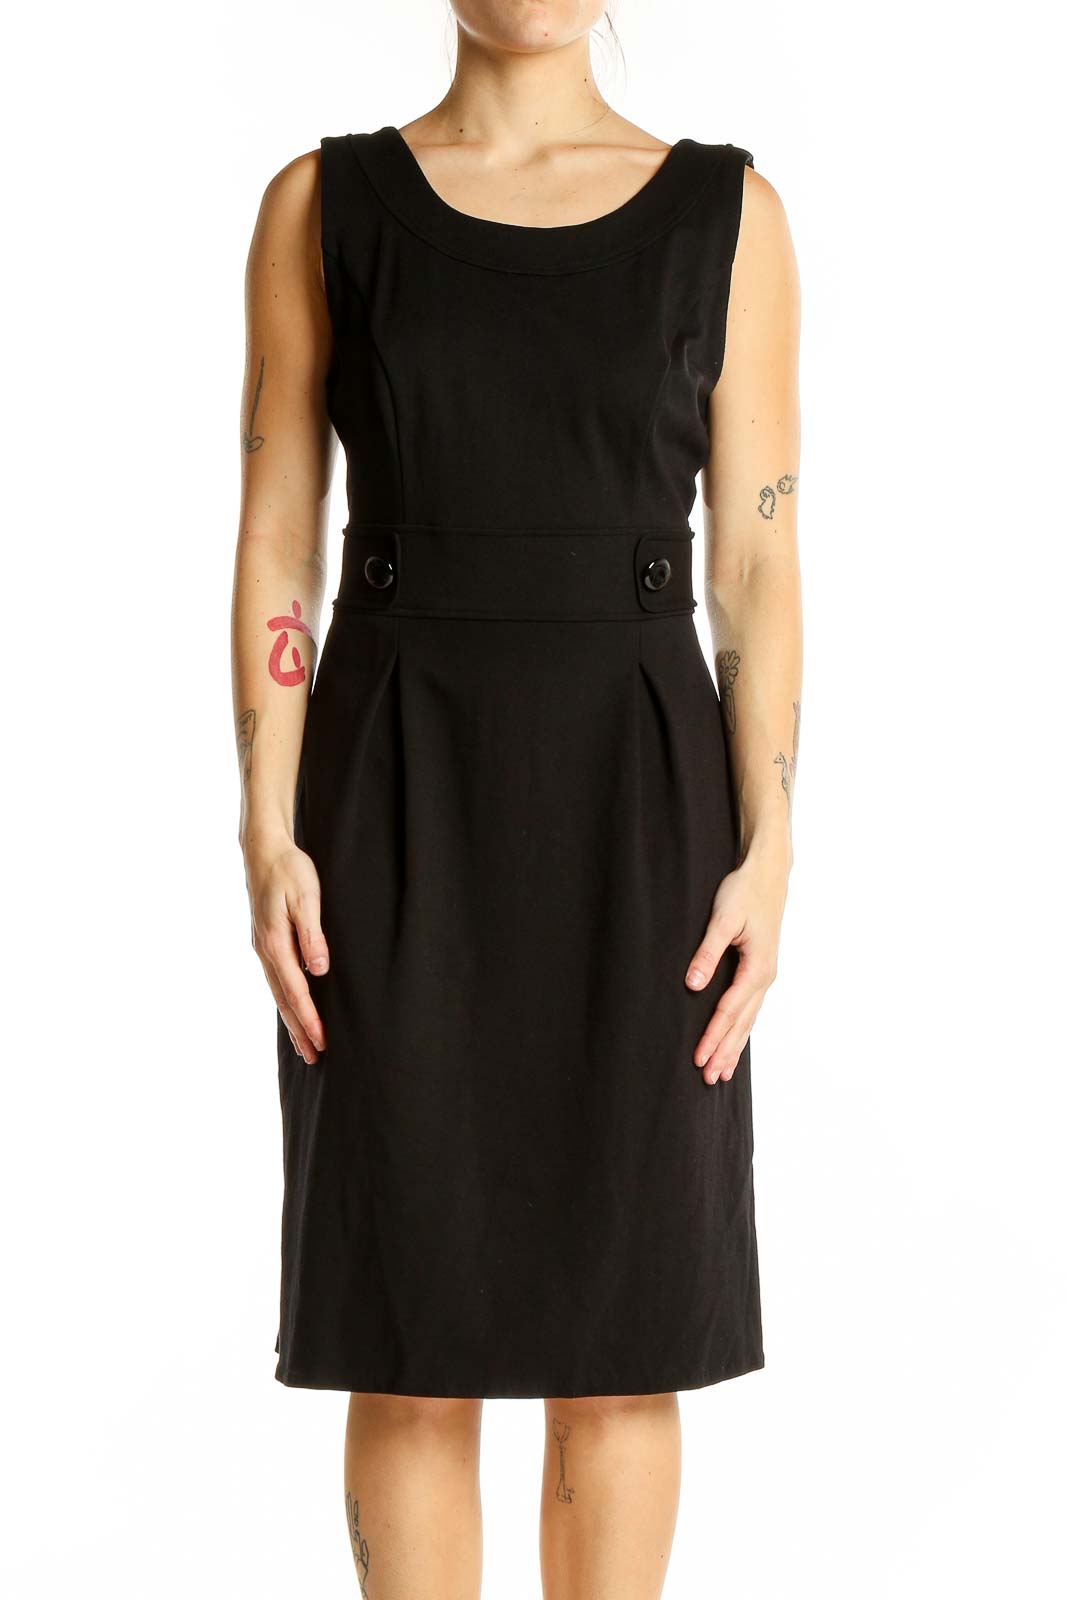 Black Office Wear Classic Solid Dress Front